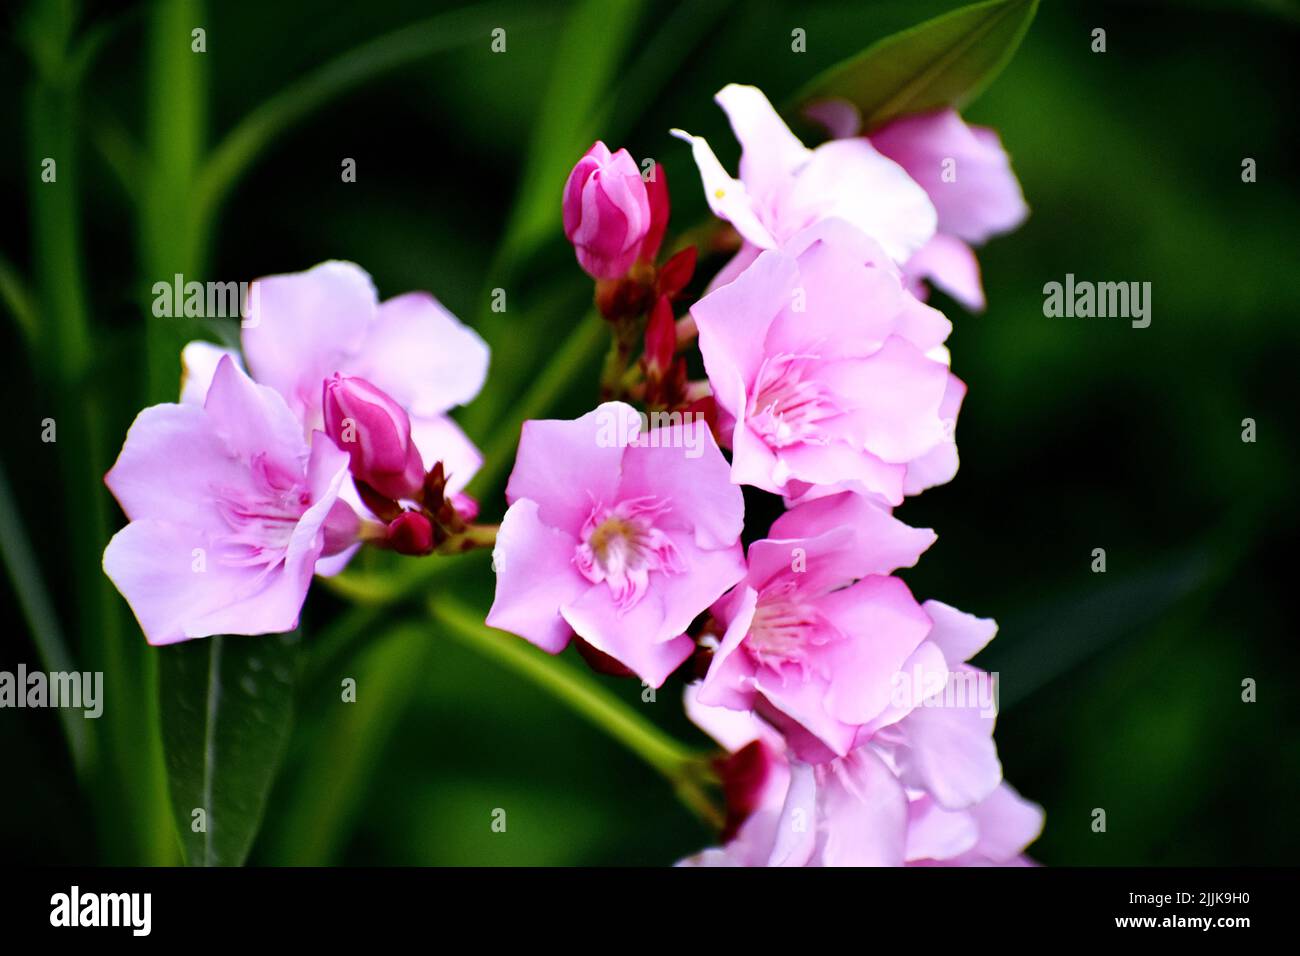 A macro view of pink Nerium oleander flowers in the garden Stock Photo